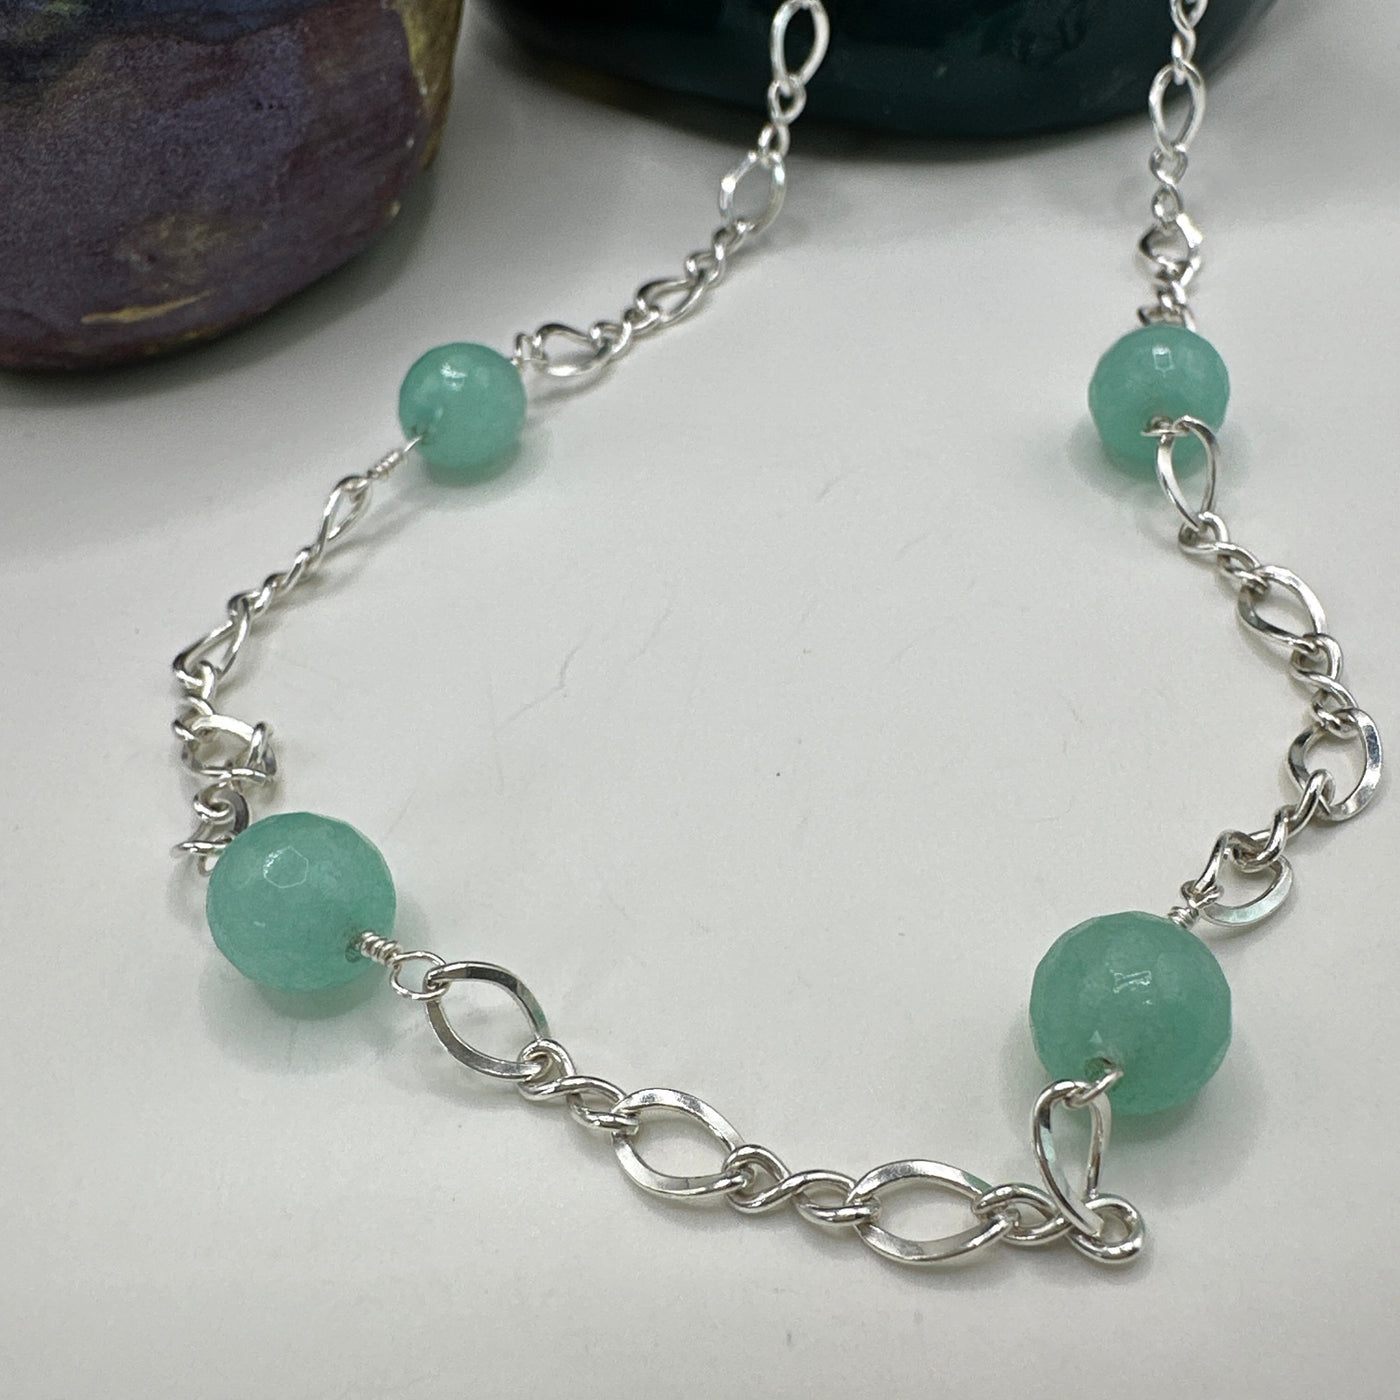 Dyed acqua jade 8mm faceted and silver chain necklace